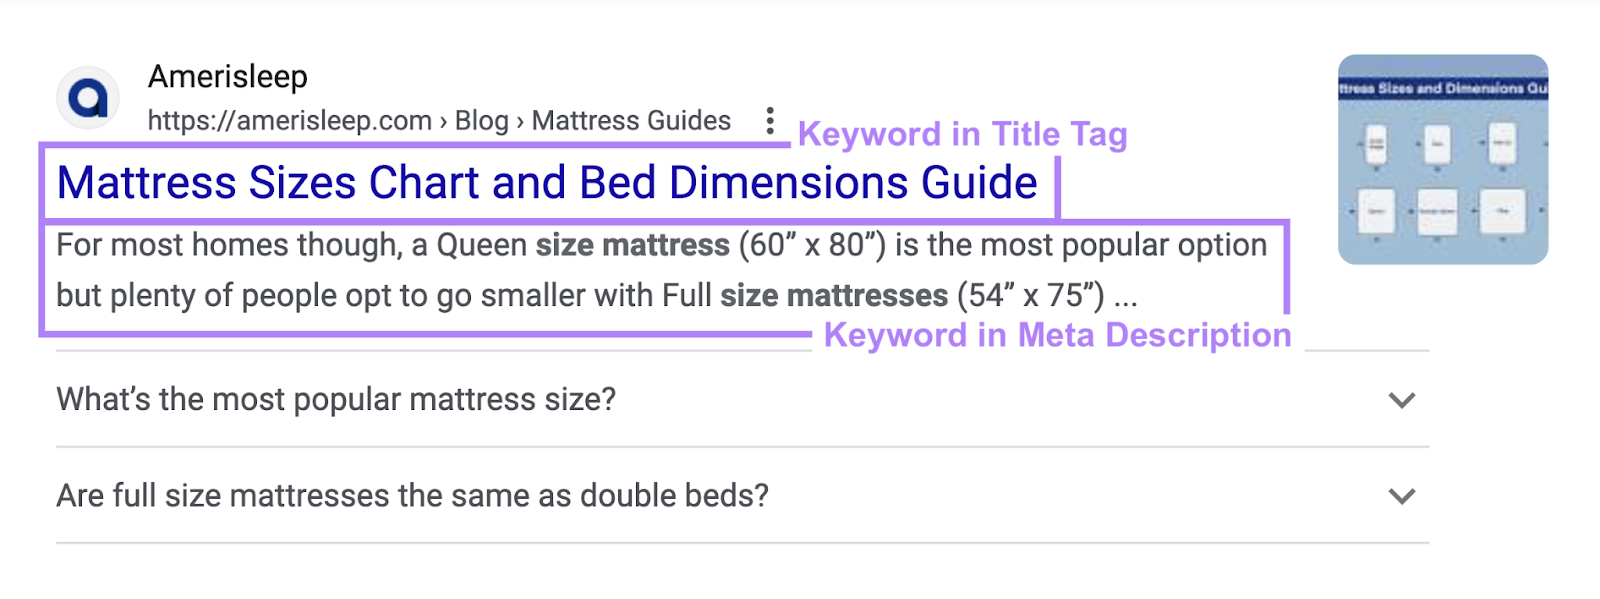 search result for Amerisleep’s mattress size guide